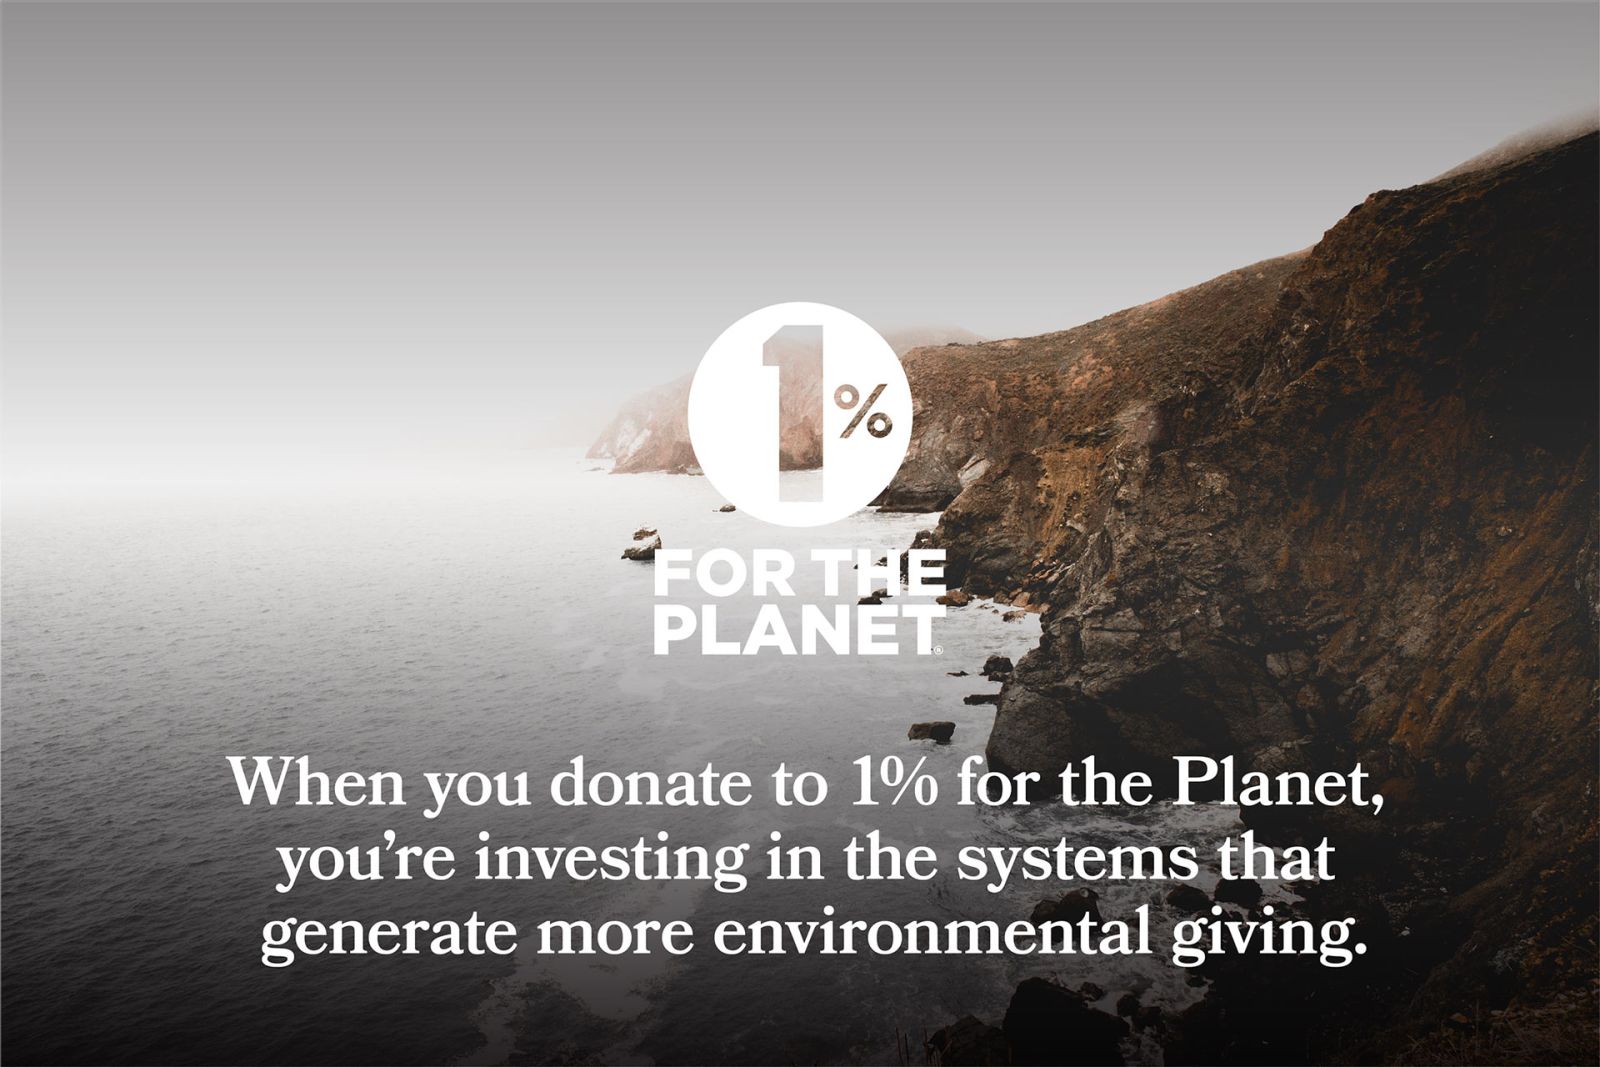 When you donate, you're investing in systems that generate more environmental giving.